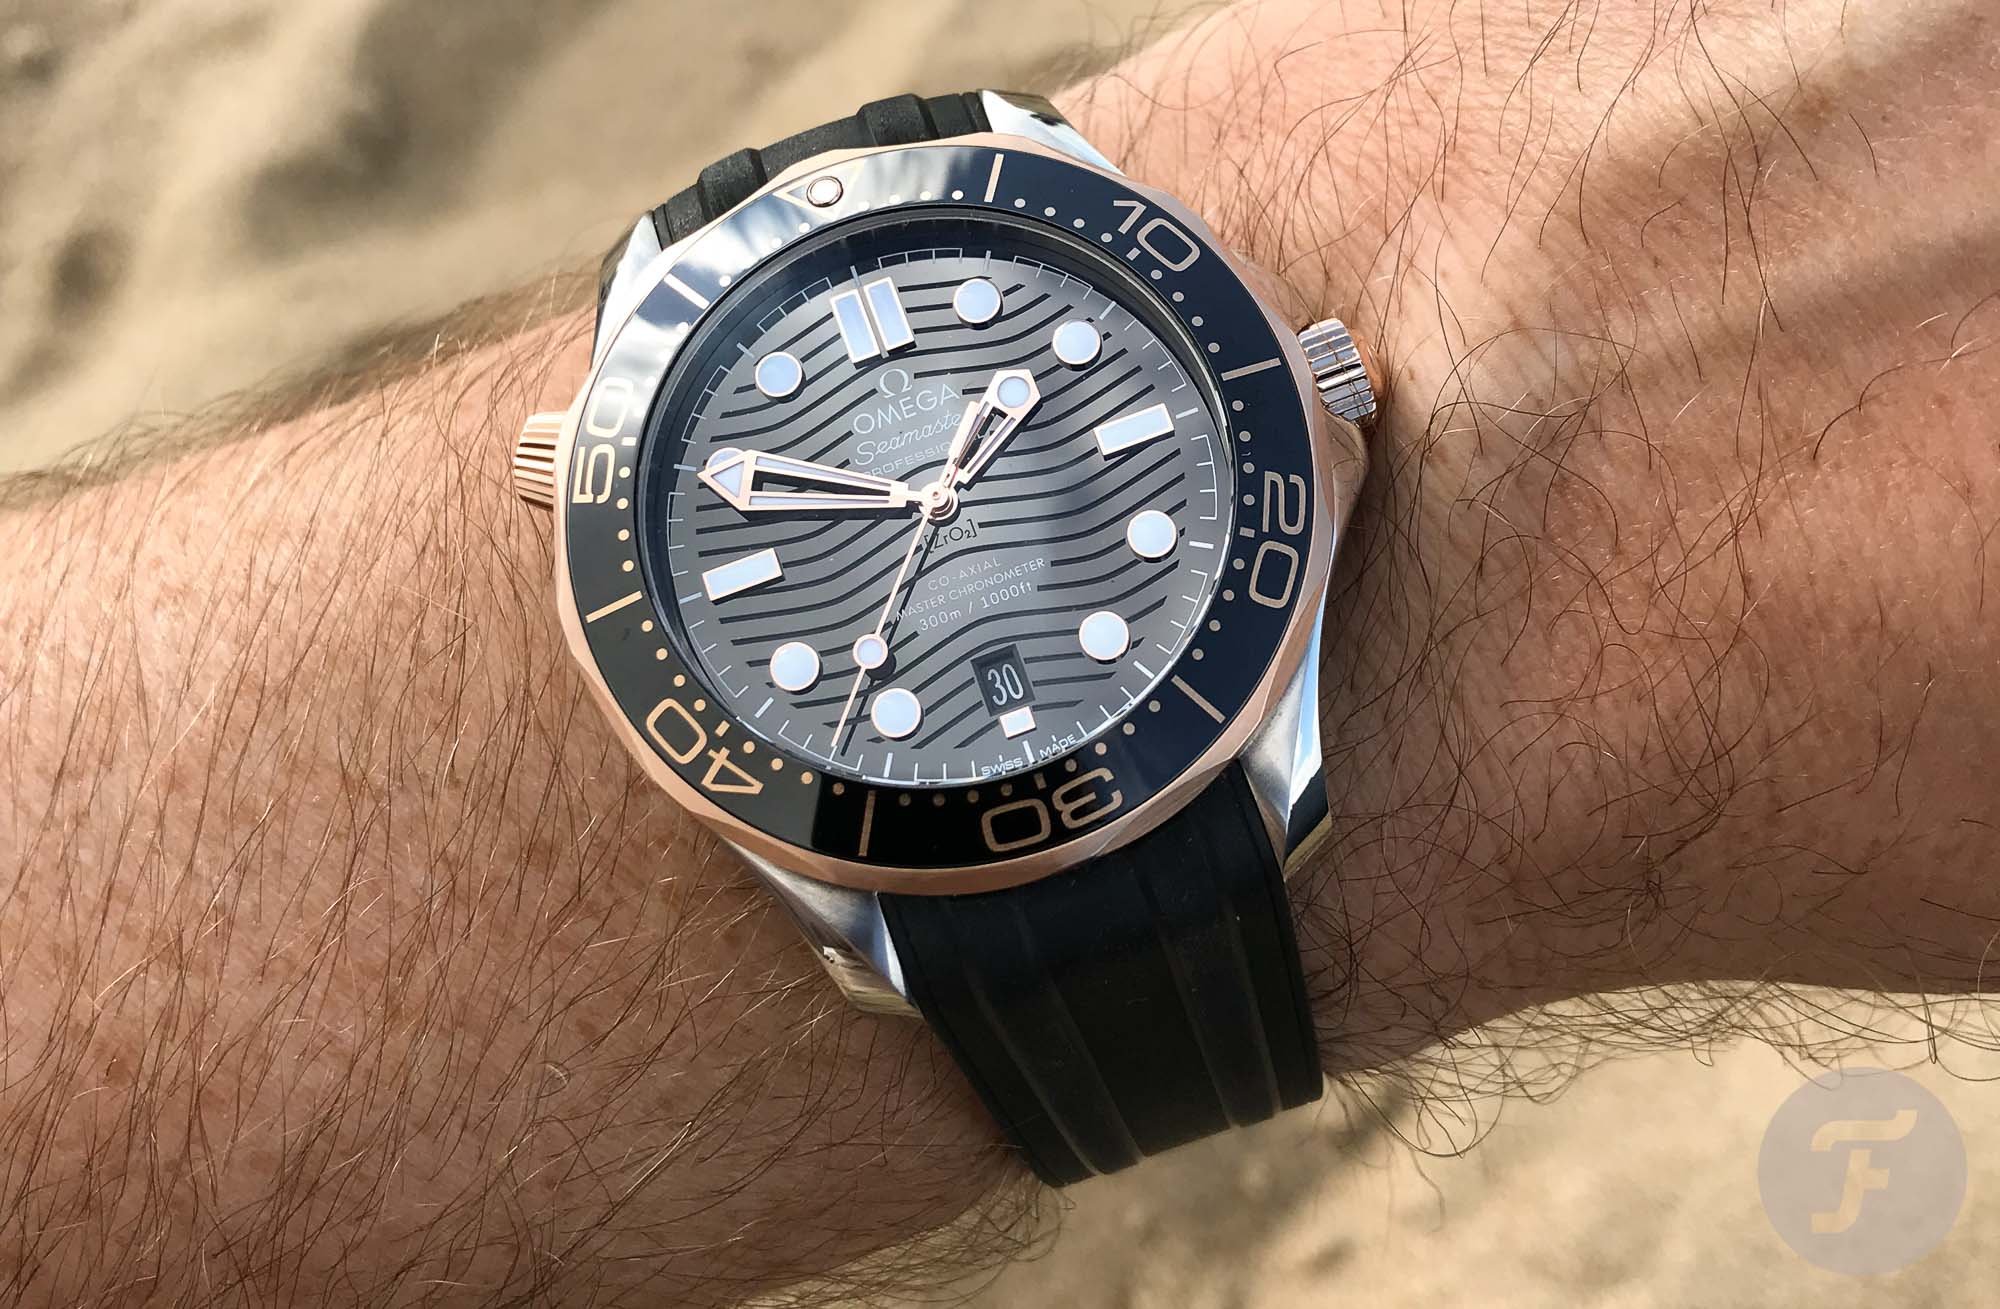 SOLD OUT: Omega Seamaster Blue Ceramic Diver 300M Co-Axial 212.30.41.2